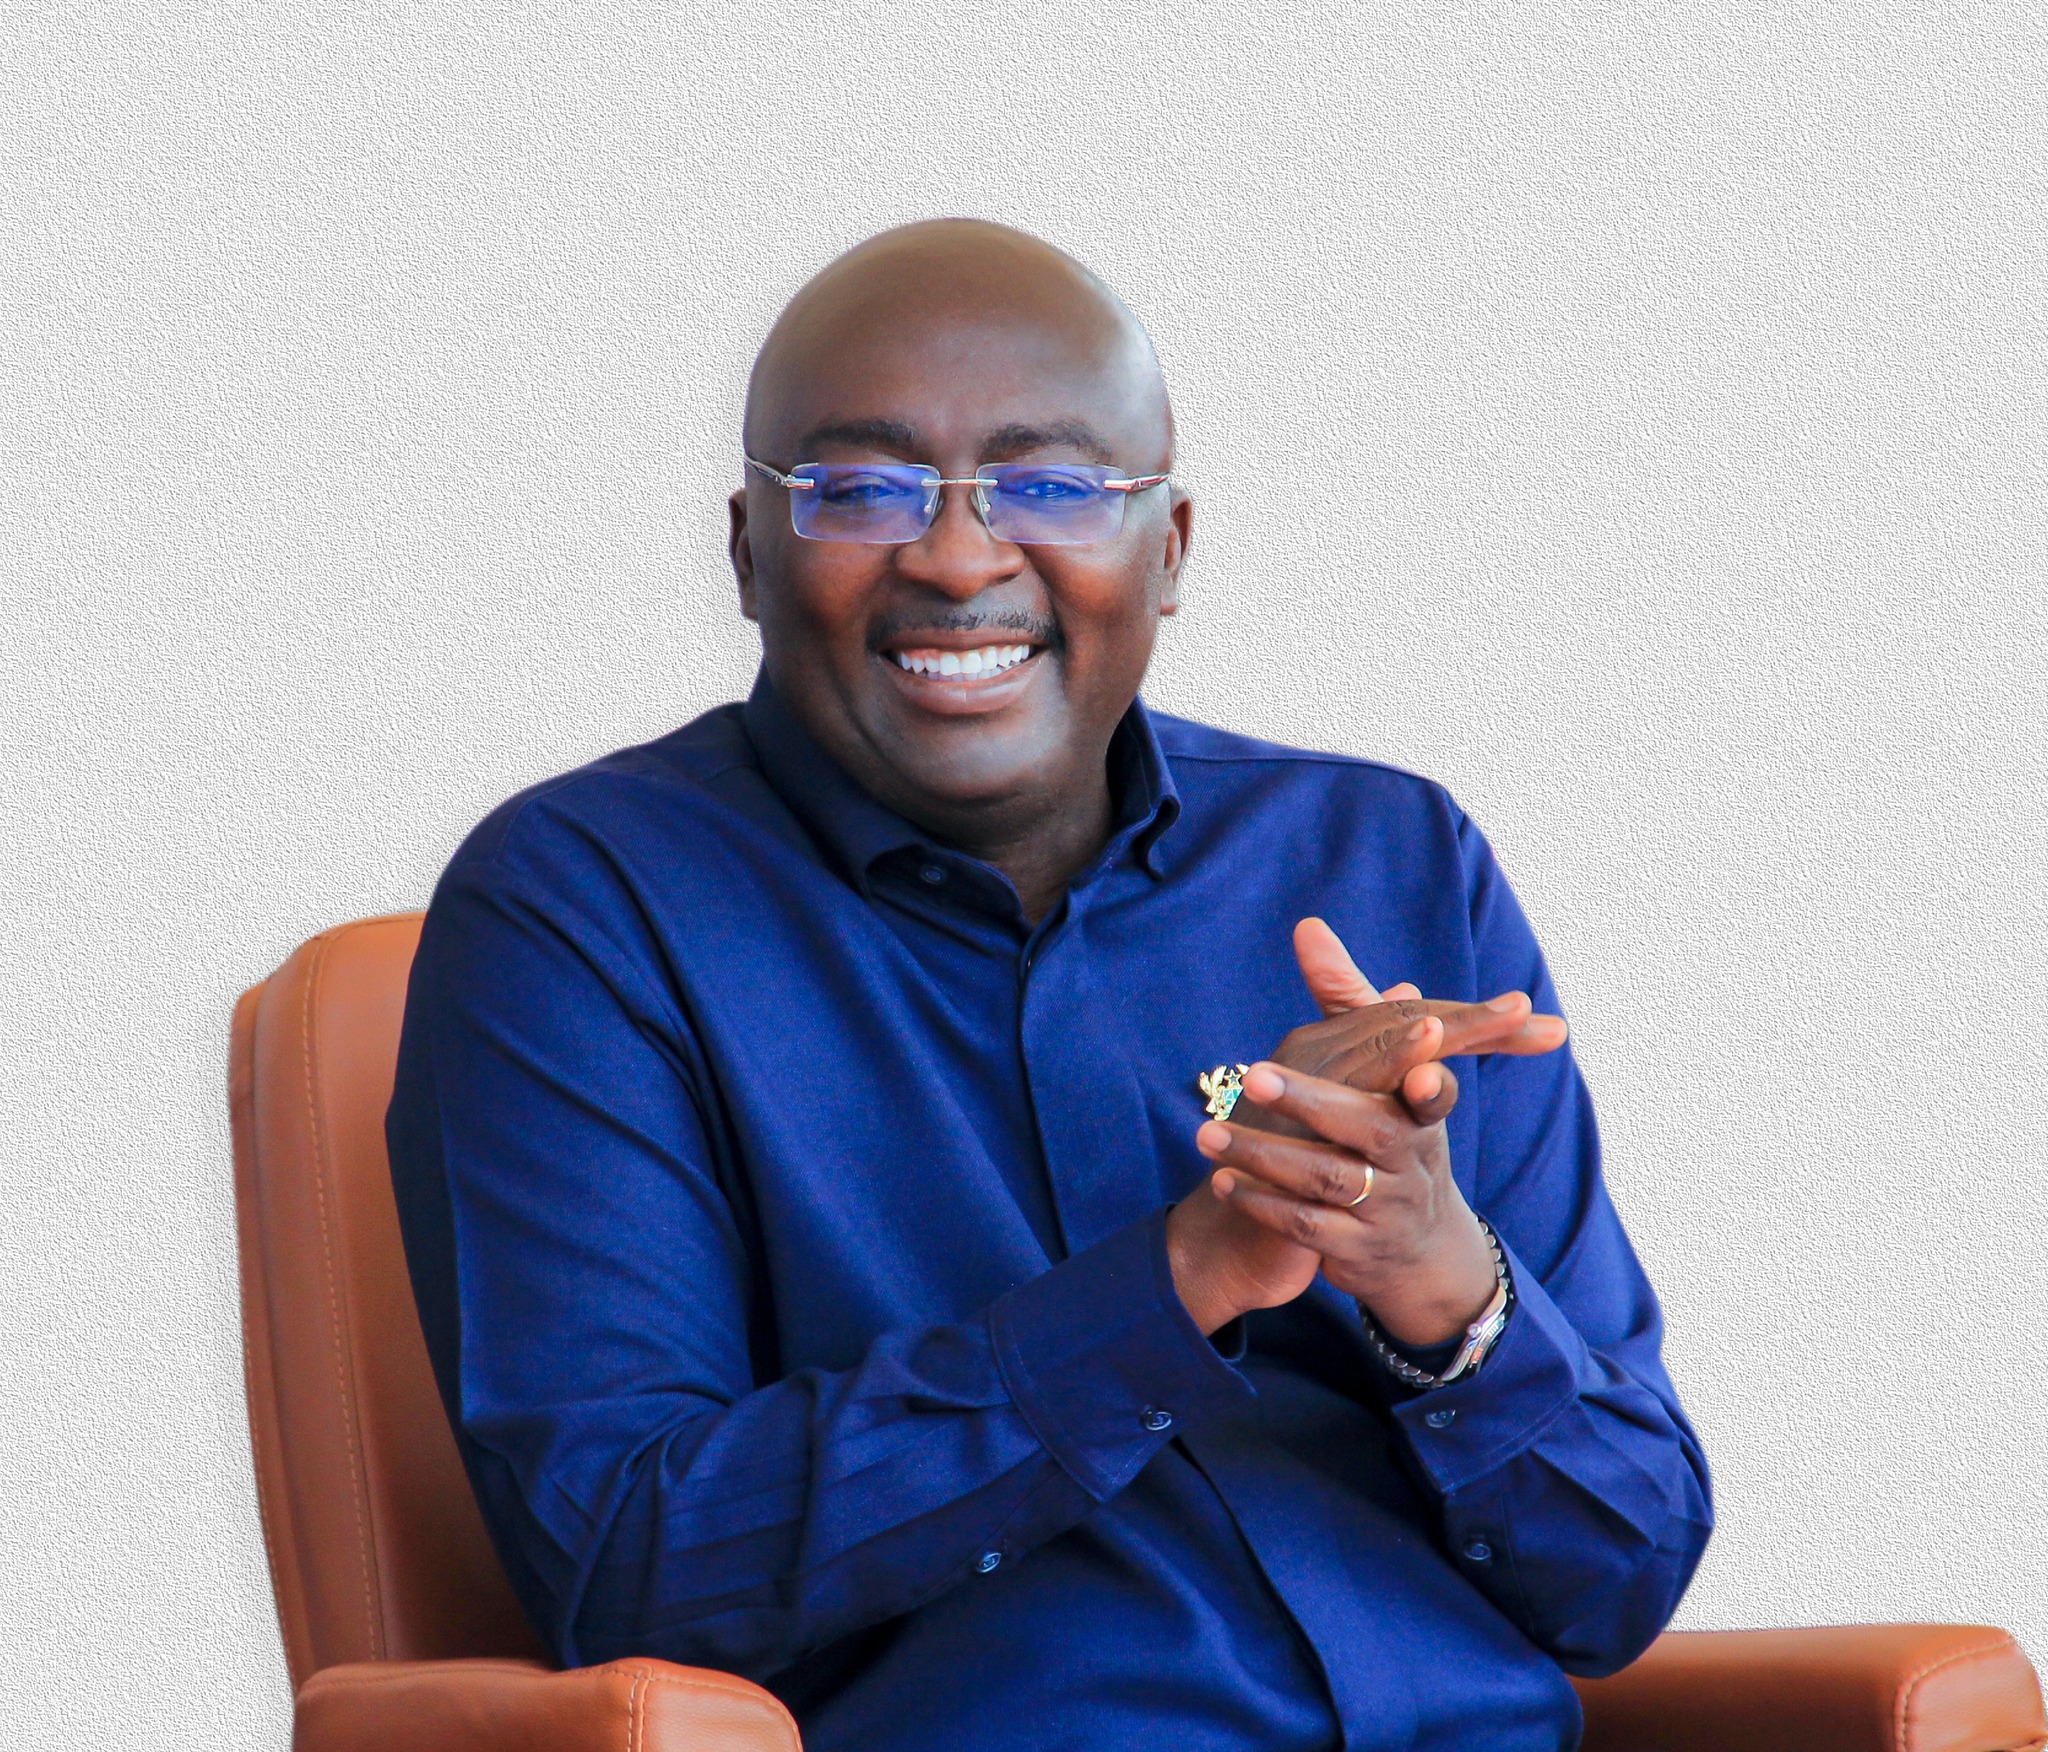 Bawumia: My most cherished asset in life is my integrity and I will not allow anyone to ruin it